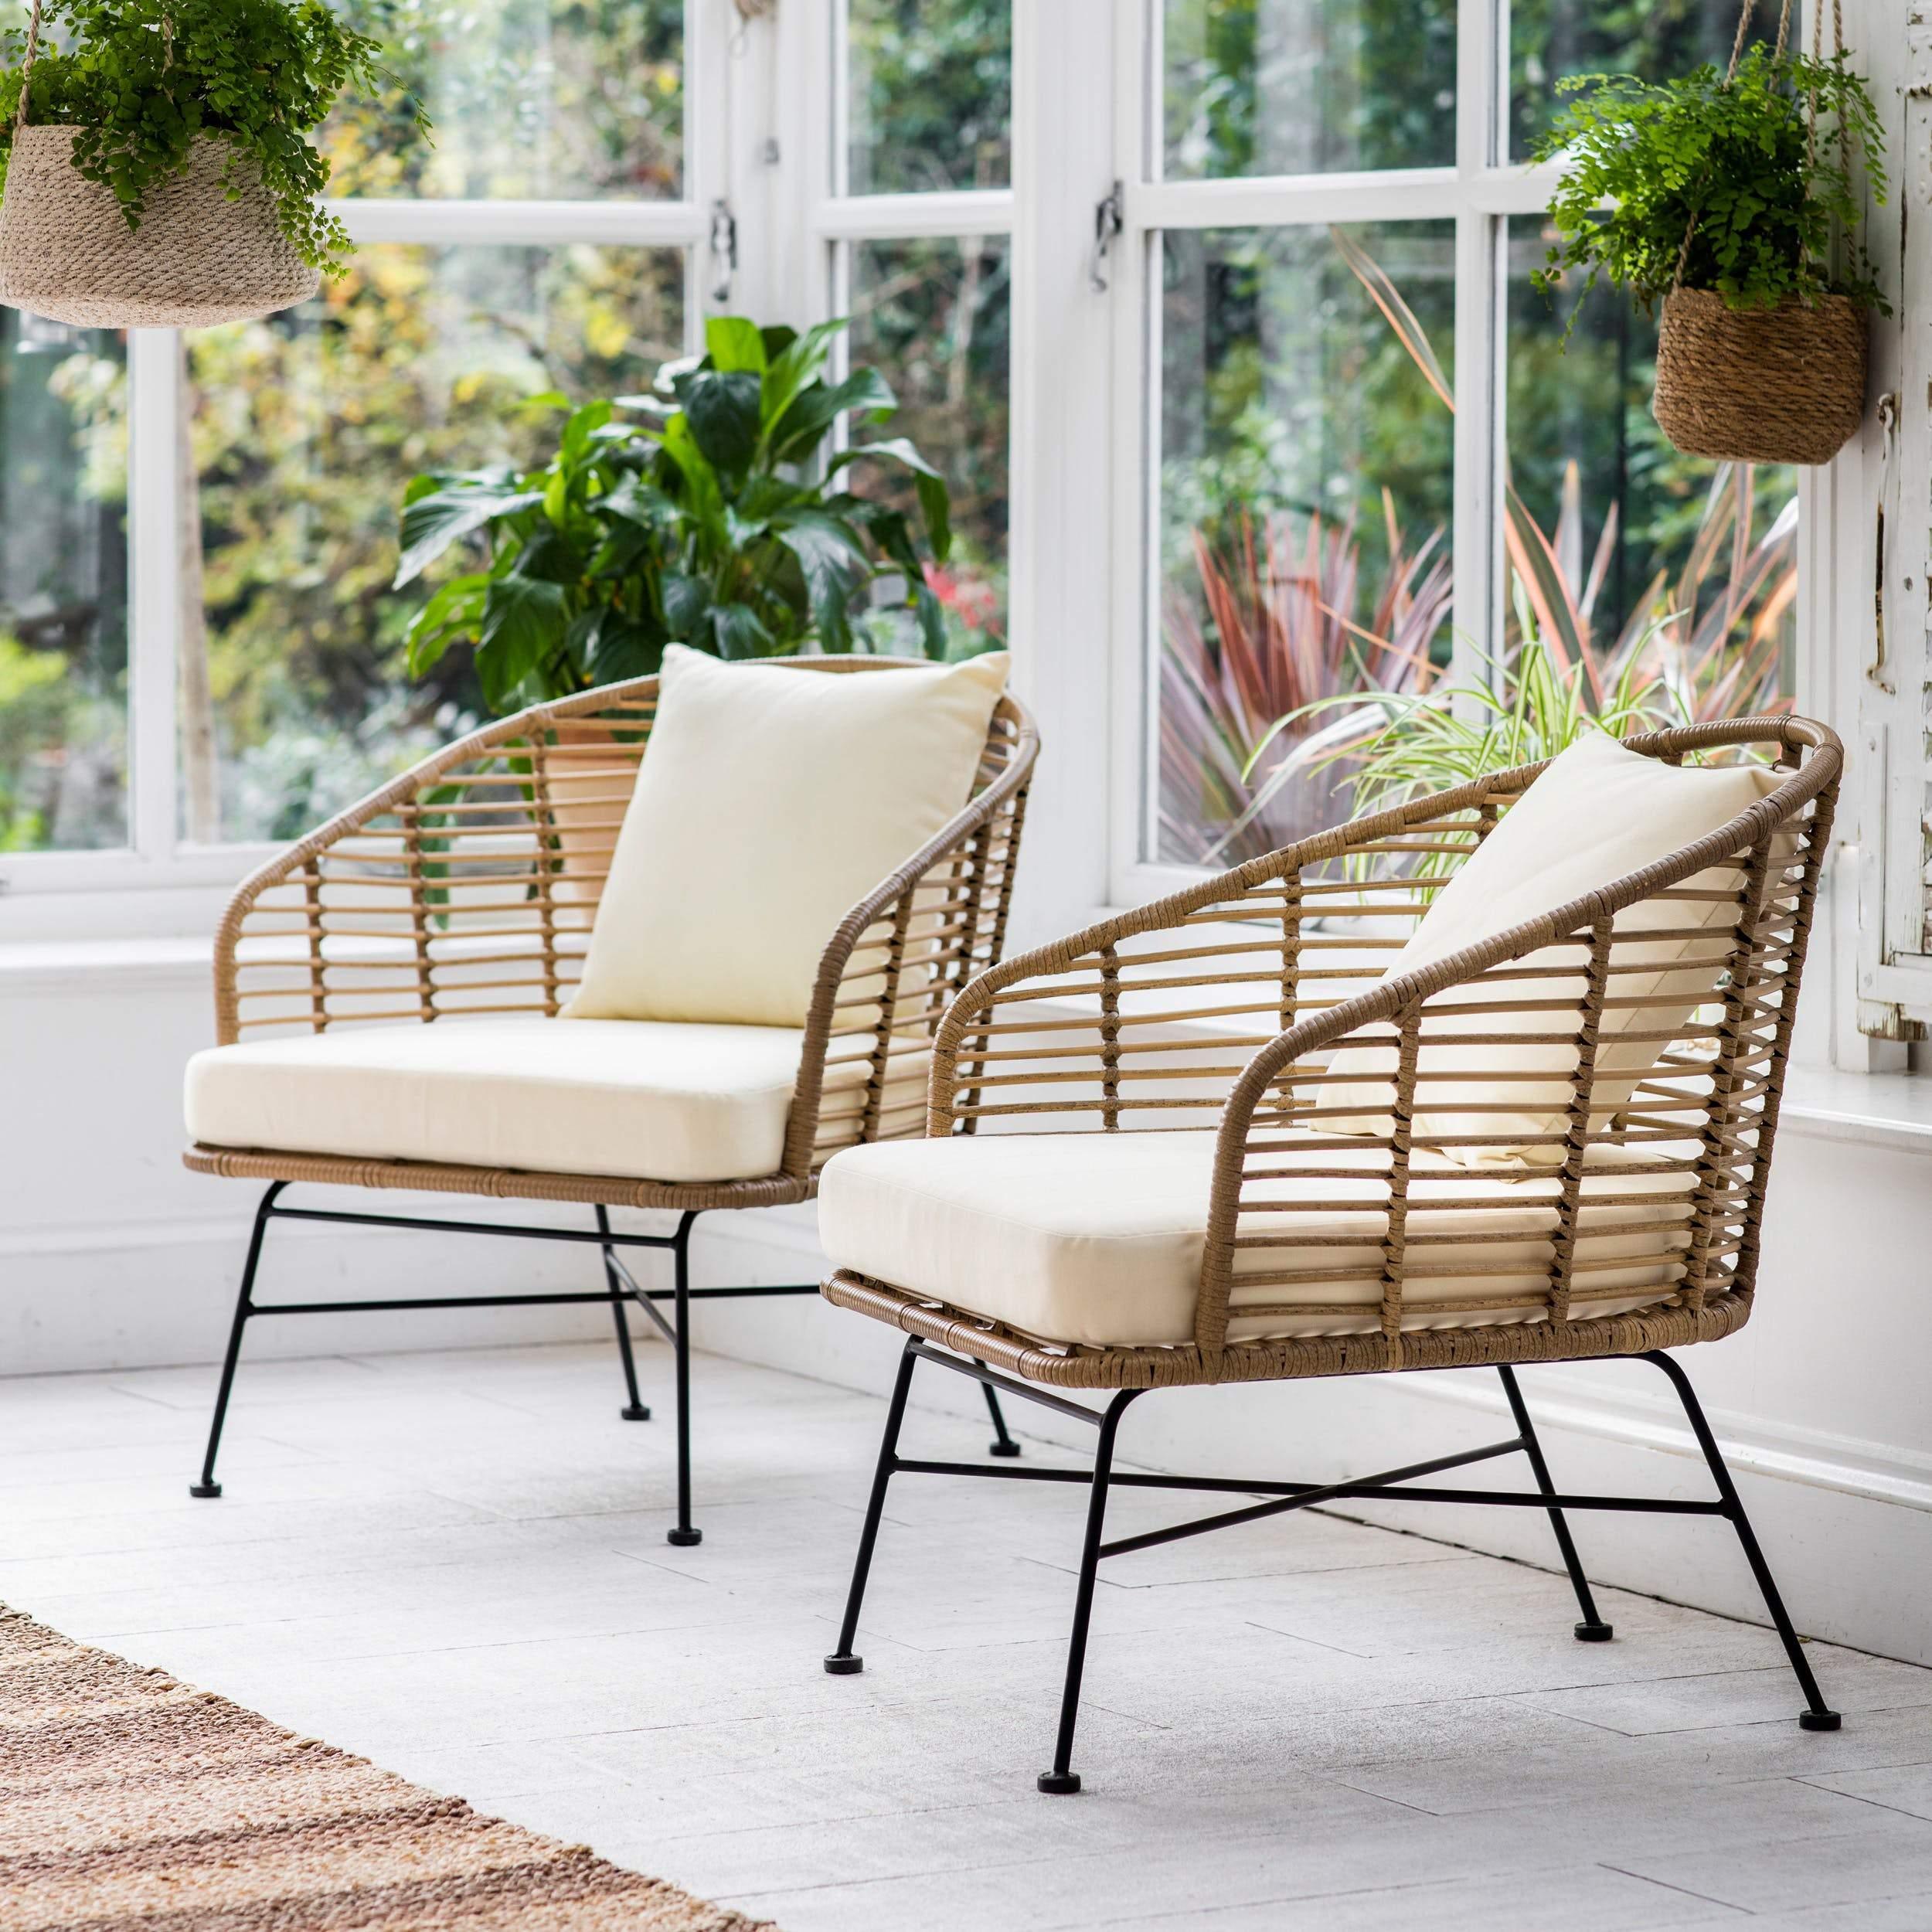 Pair of Outdoor Bamboo Hampstead Armchairs - Maison Rêves UK